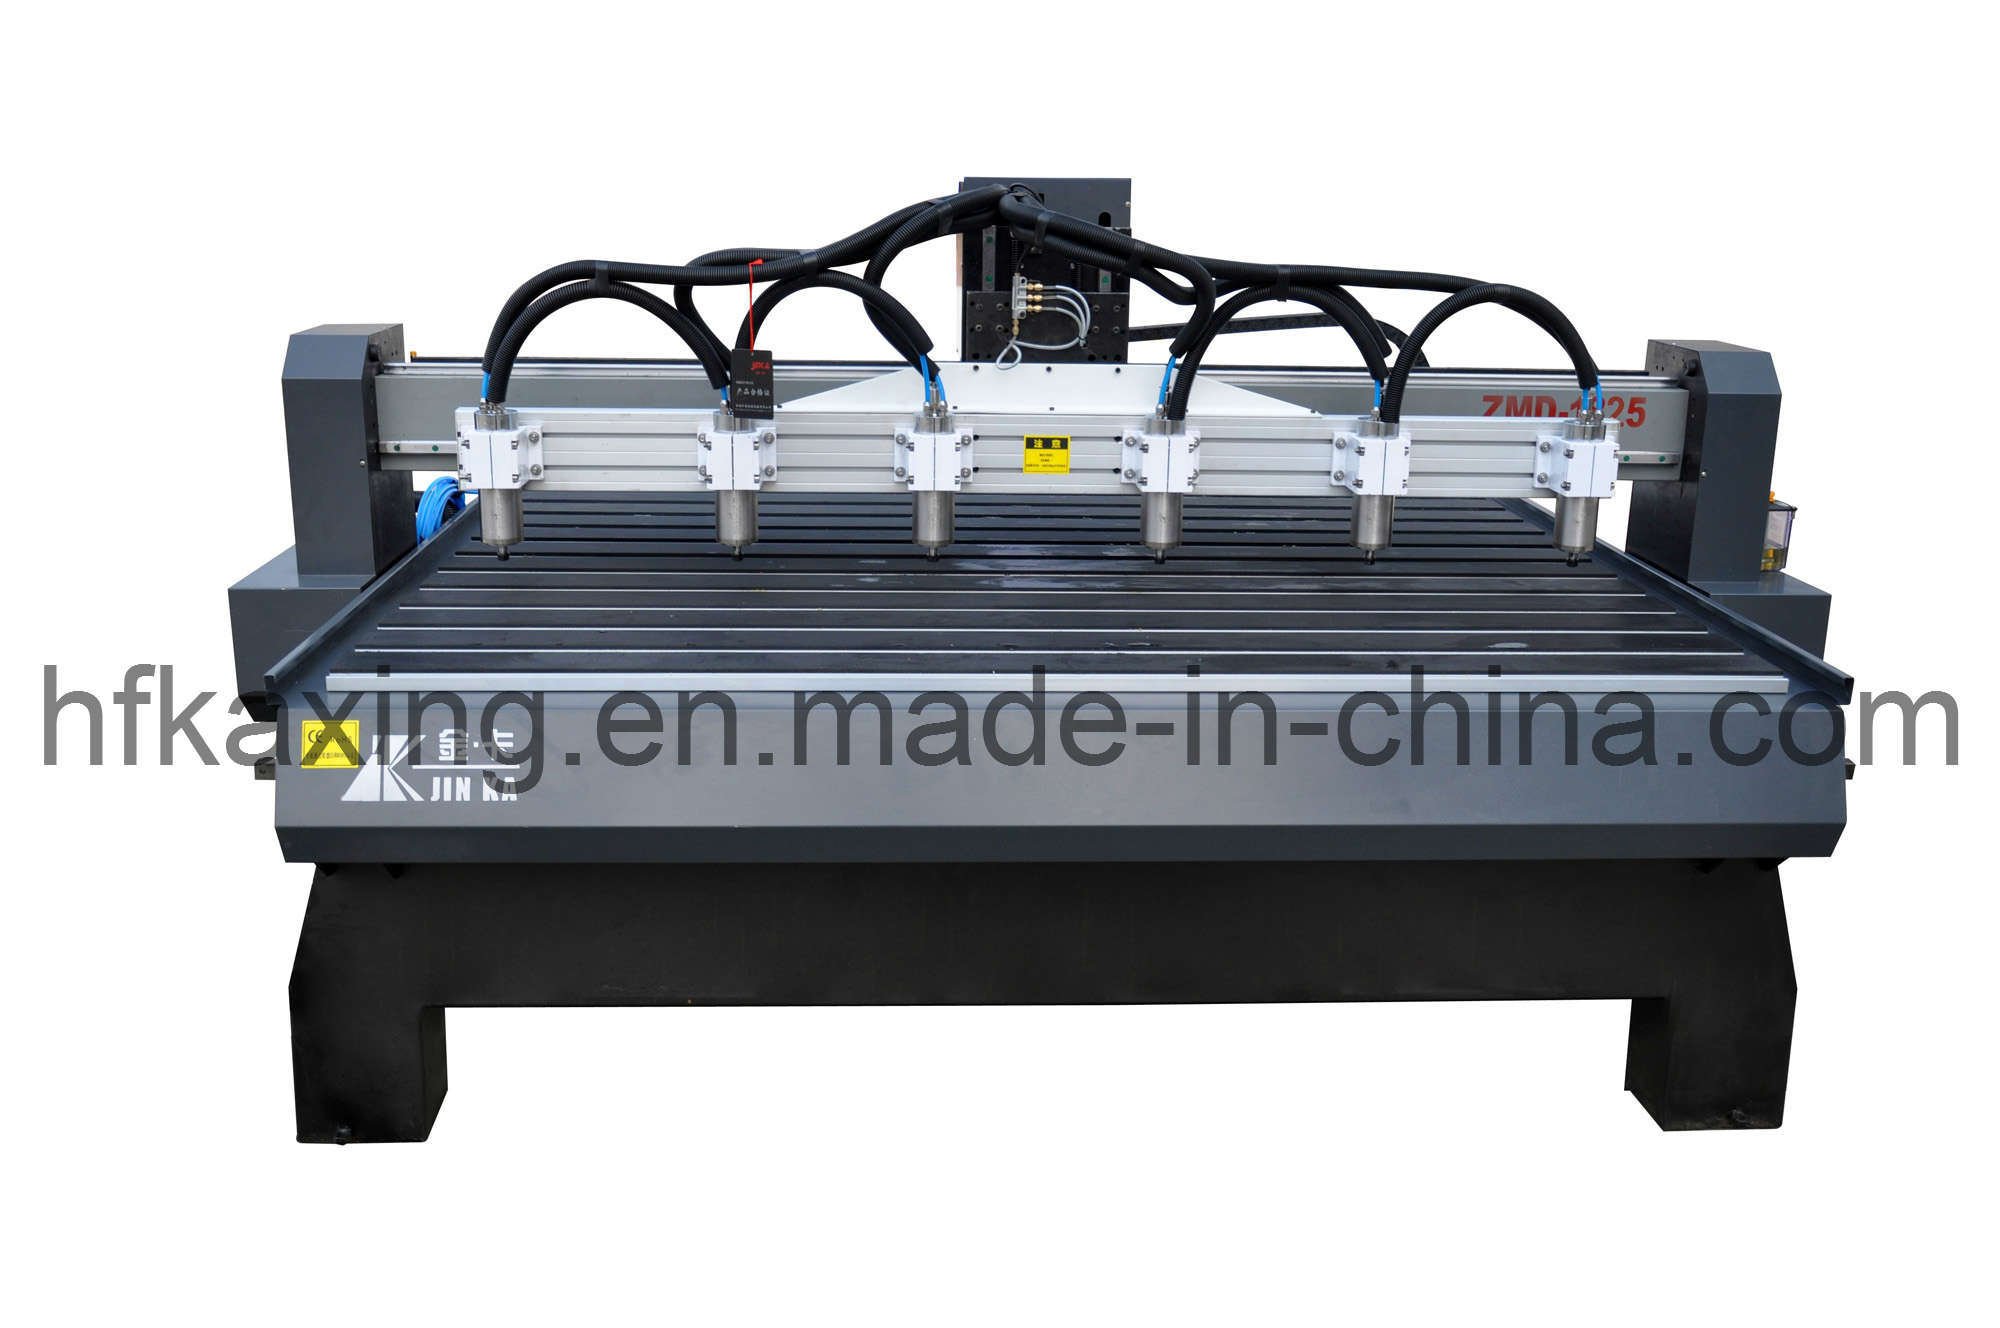 Competitive Zmd 1518A Woodworking CNC Engraver CNC Router